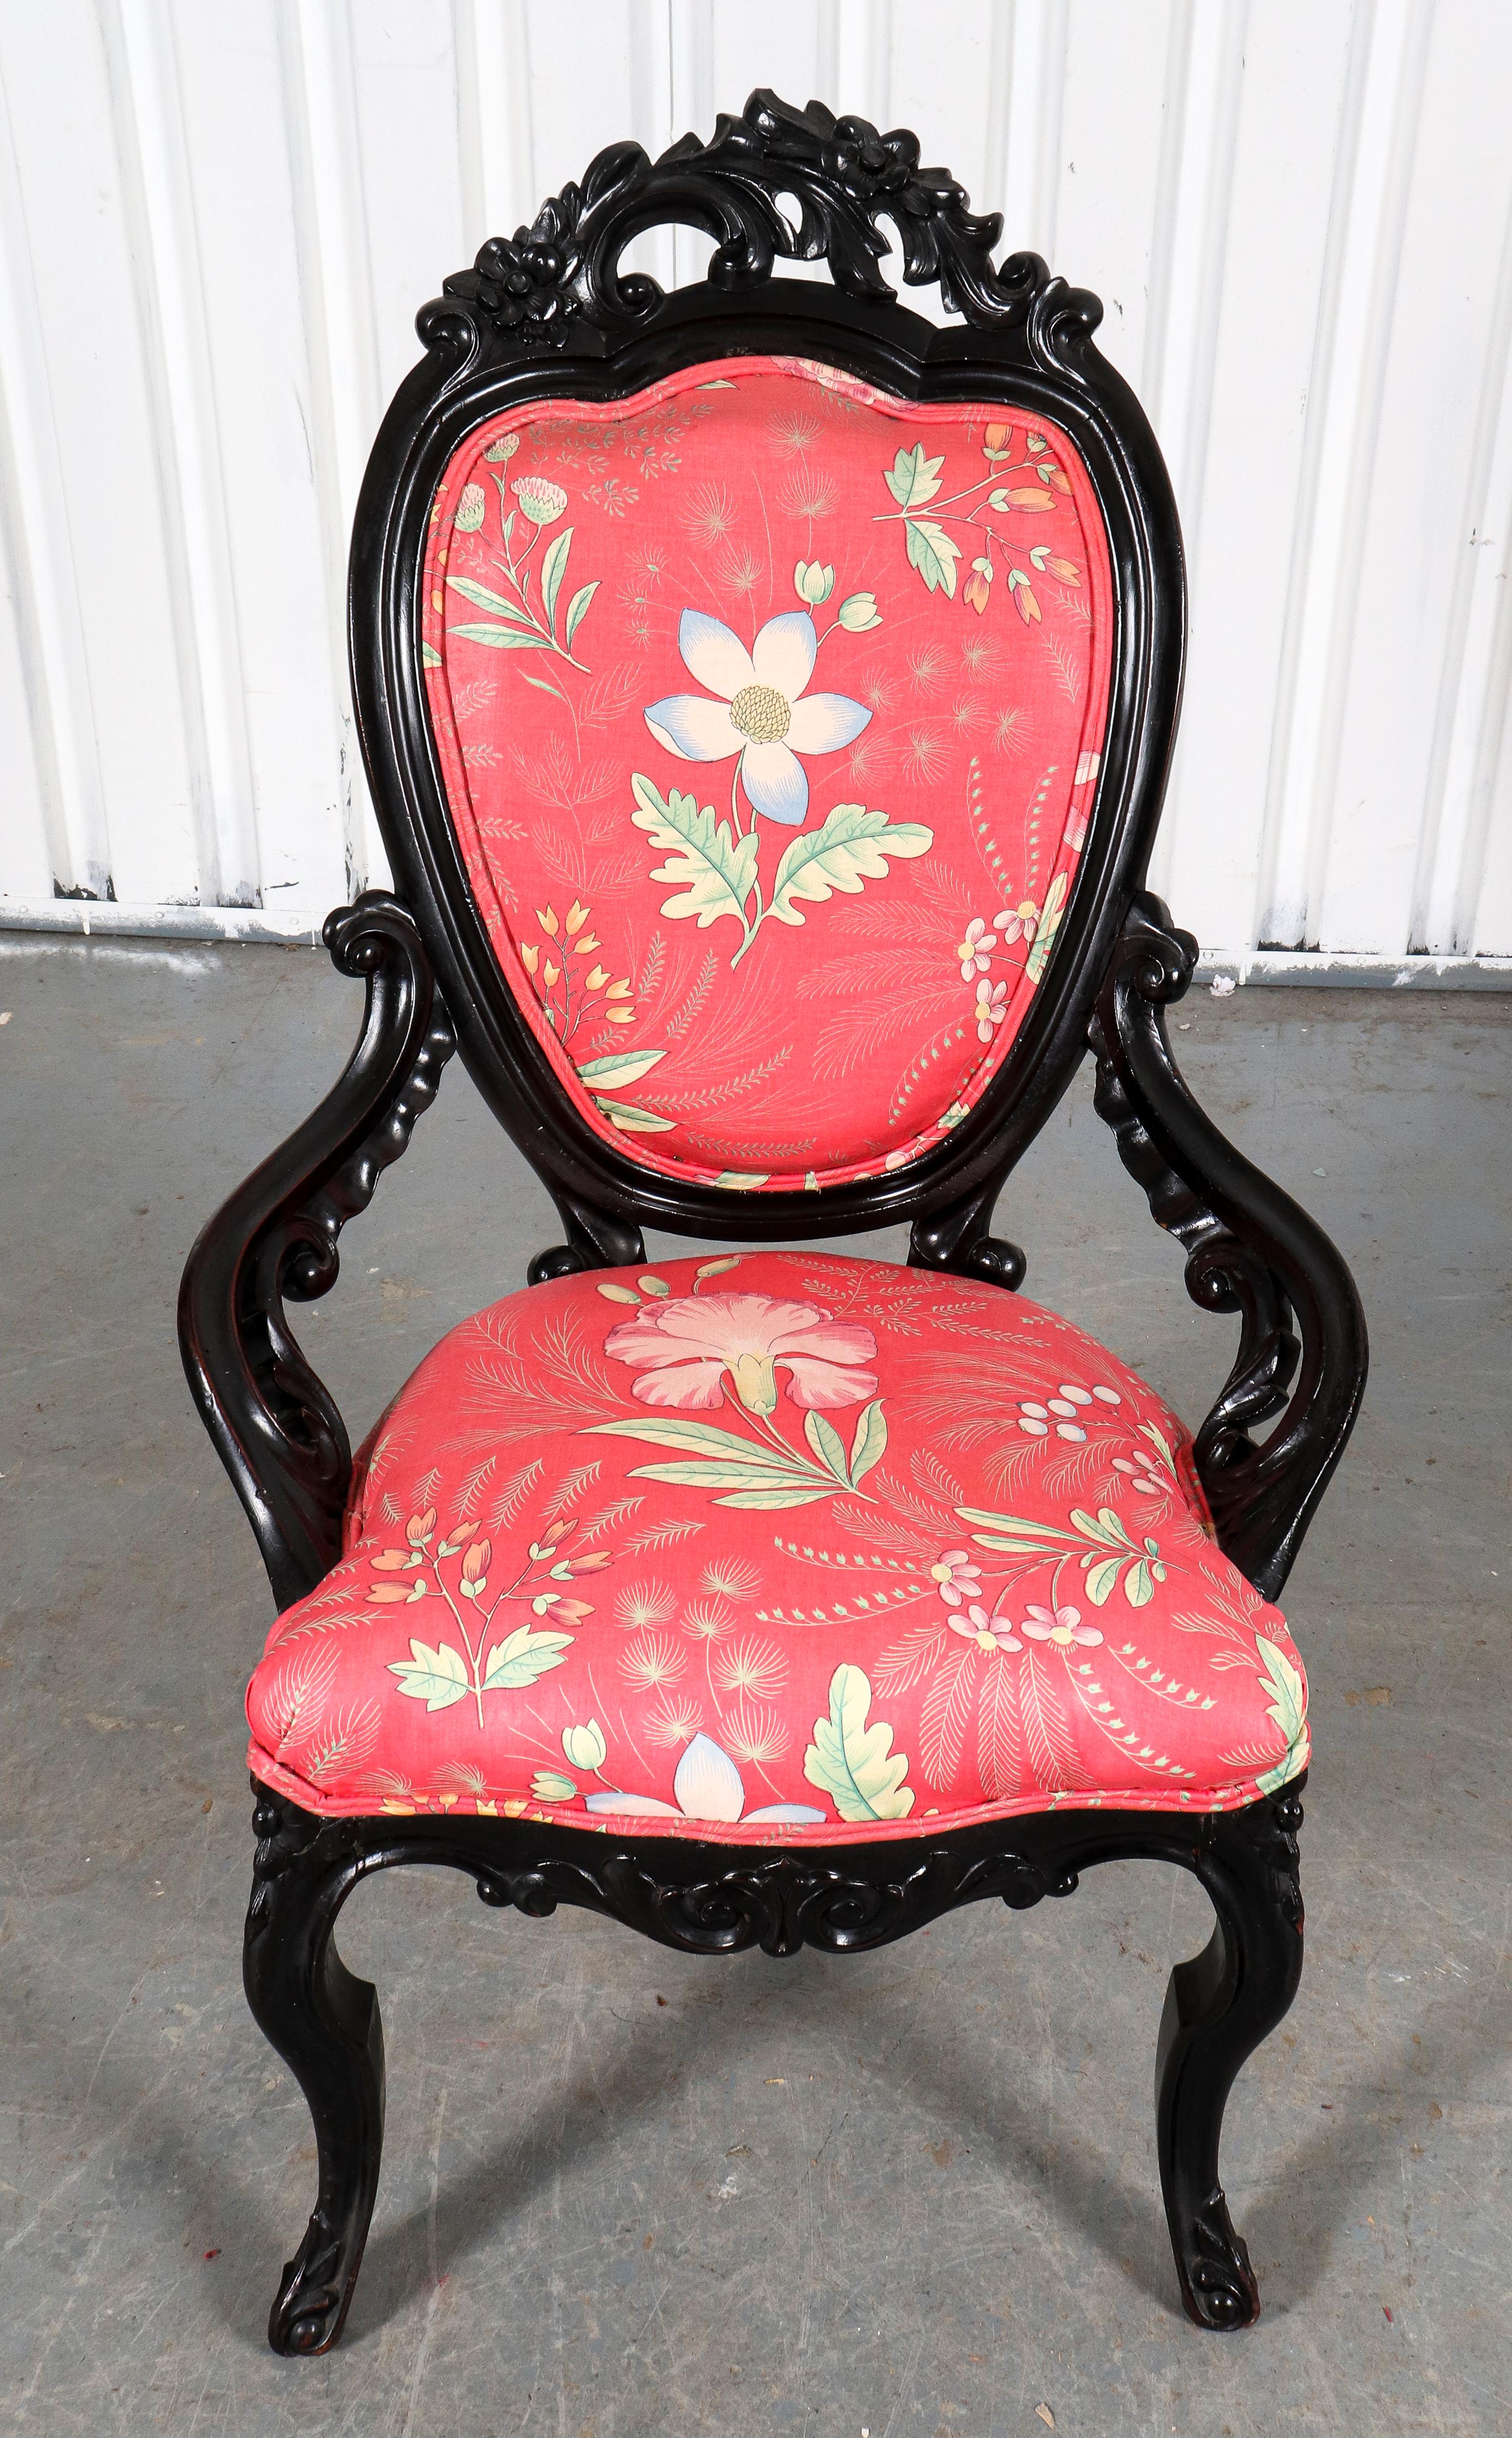 American Rococo Revival ebonized carved wood slipper chair with upholstered seat and back.